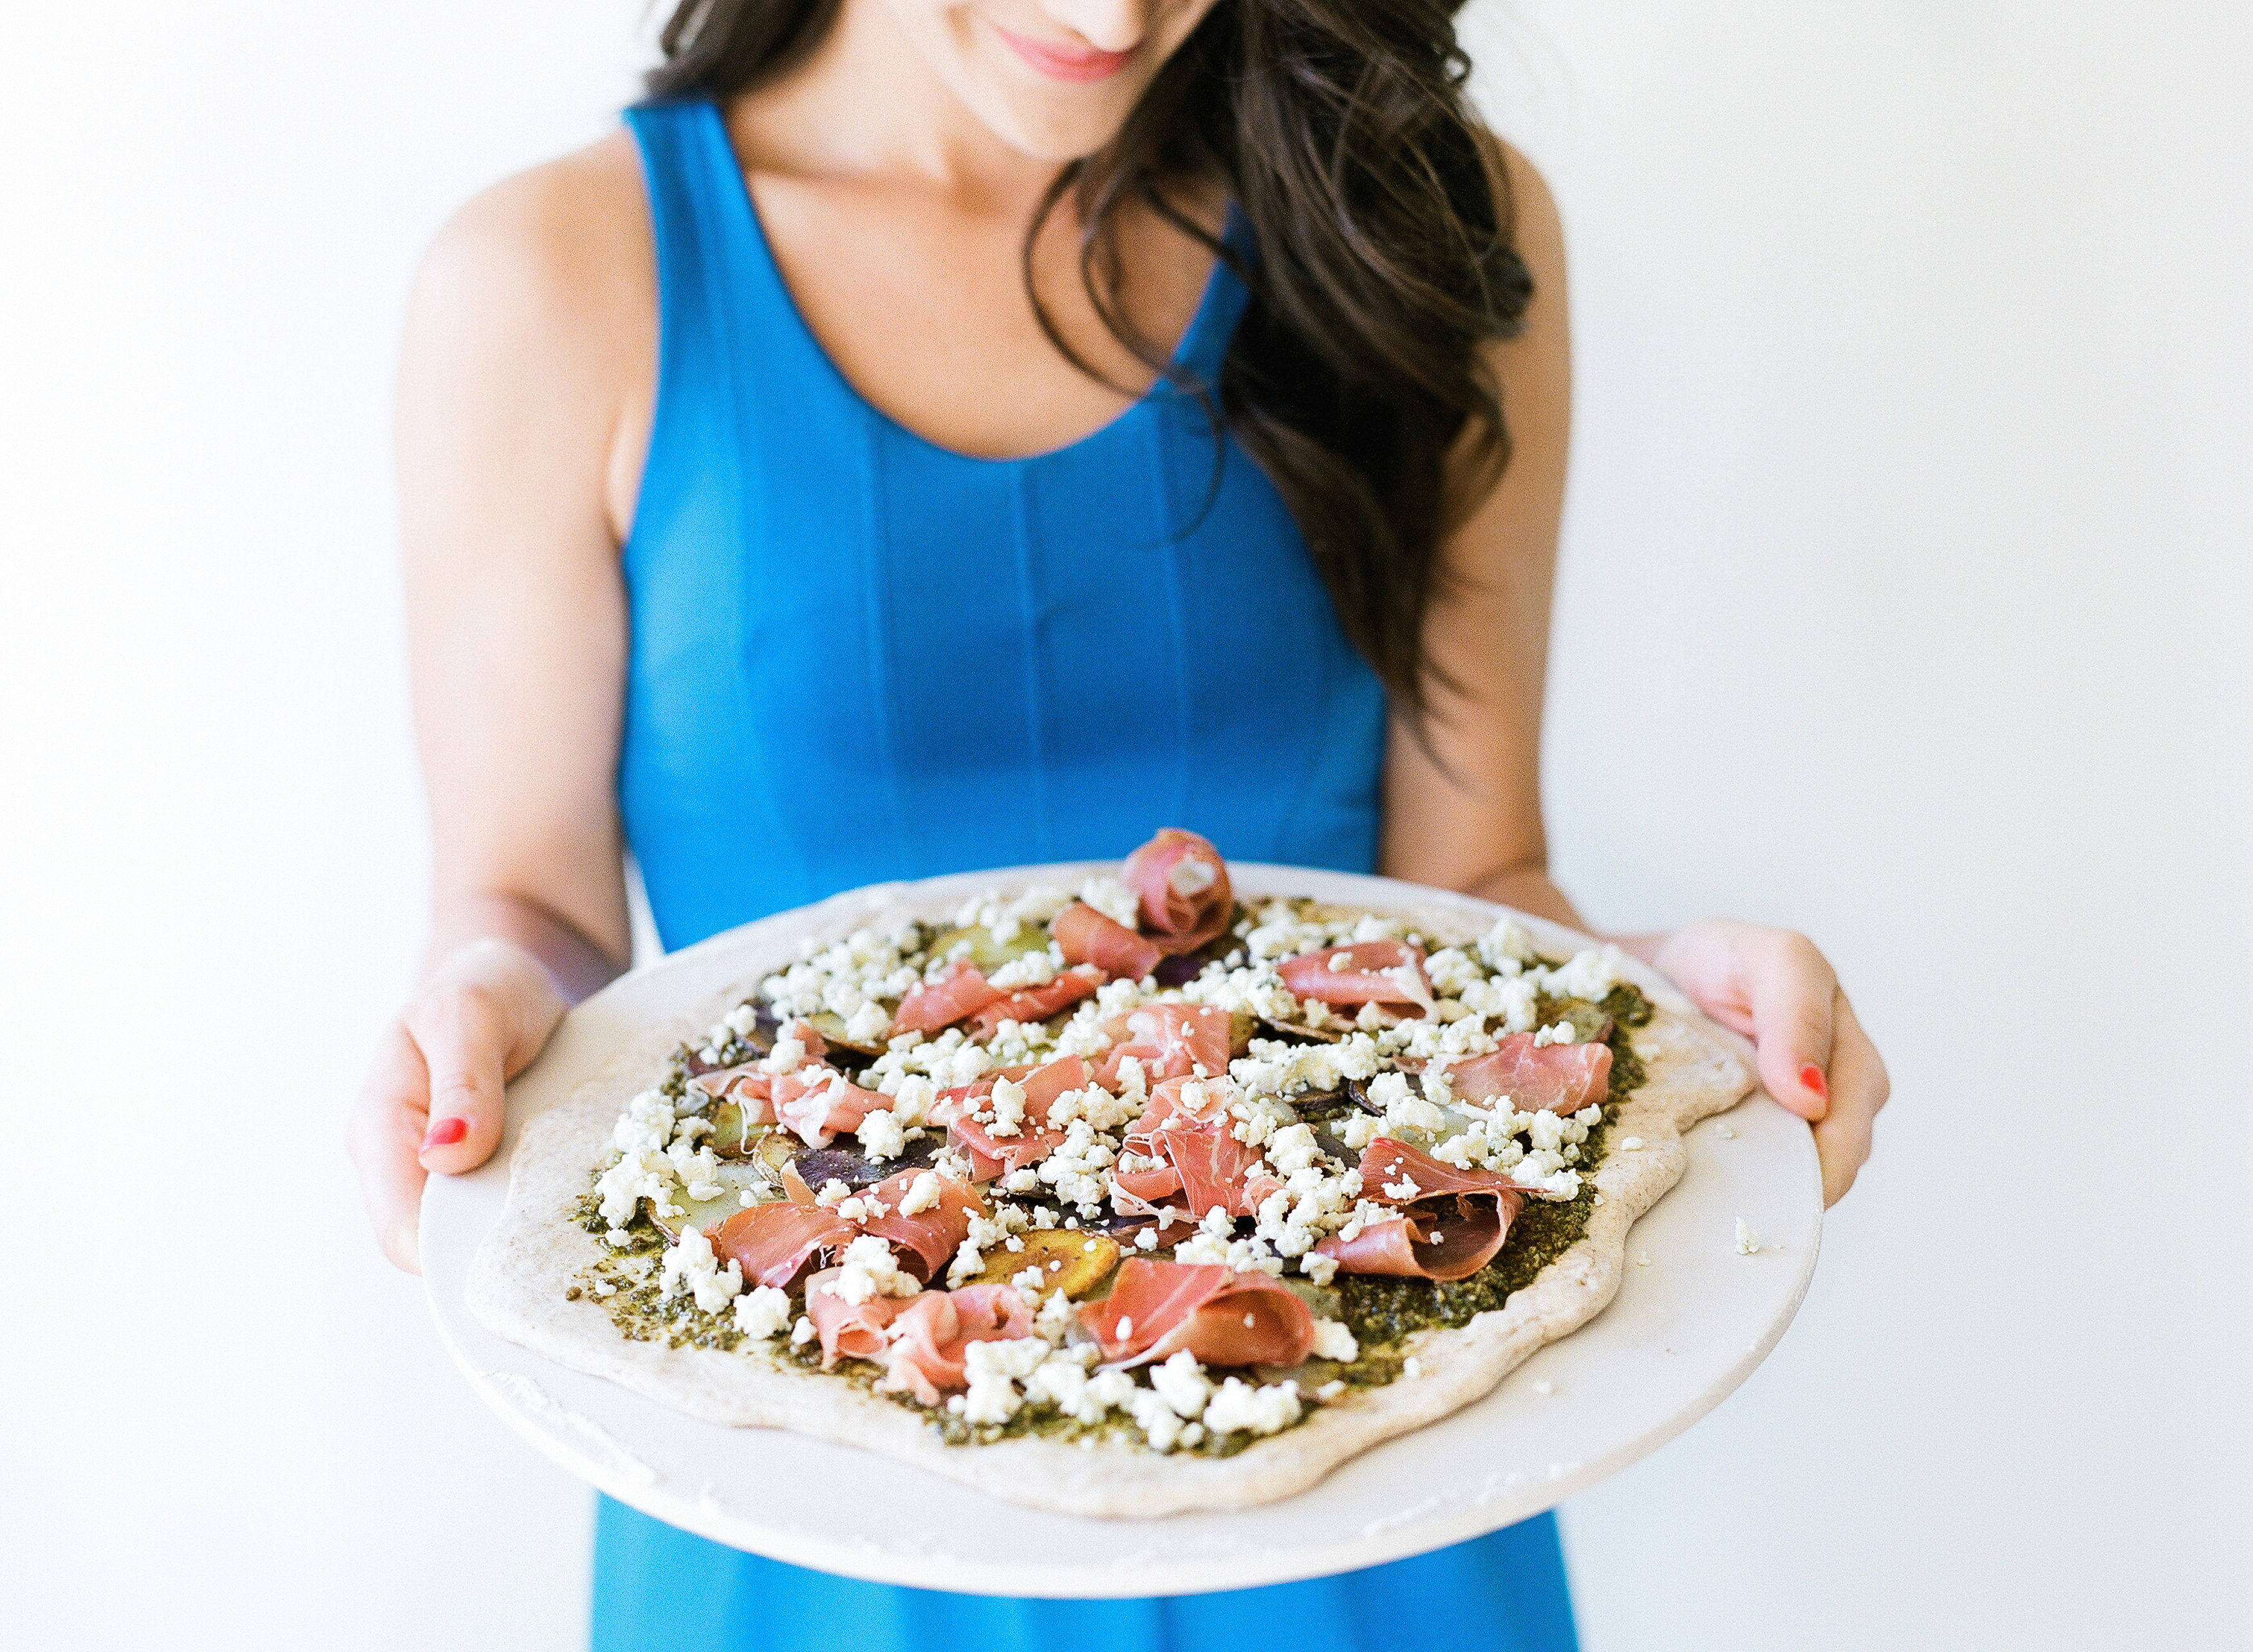 Date Night In - Make Your Own Pizza